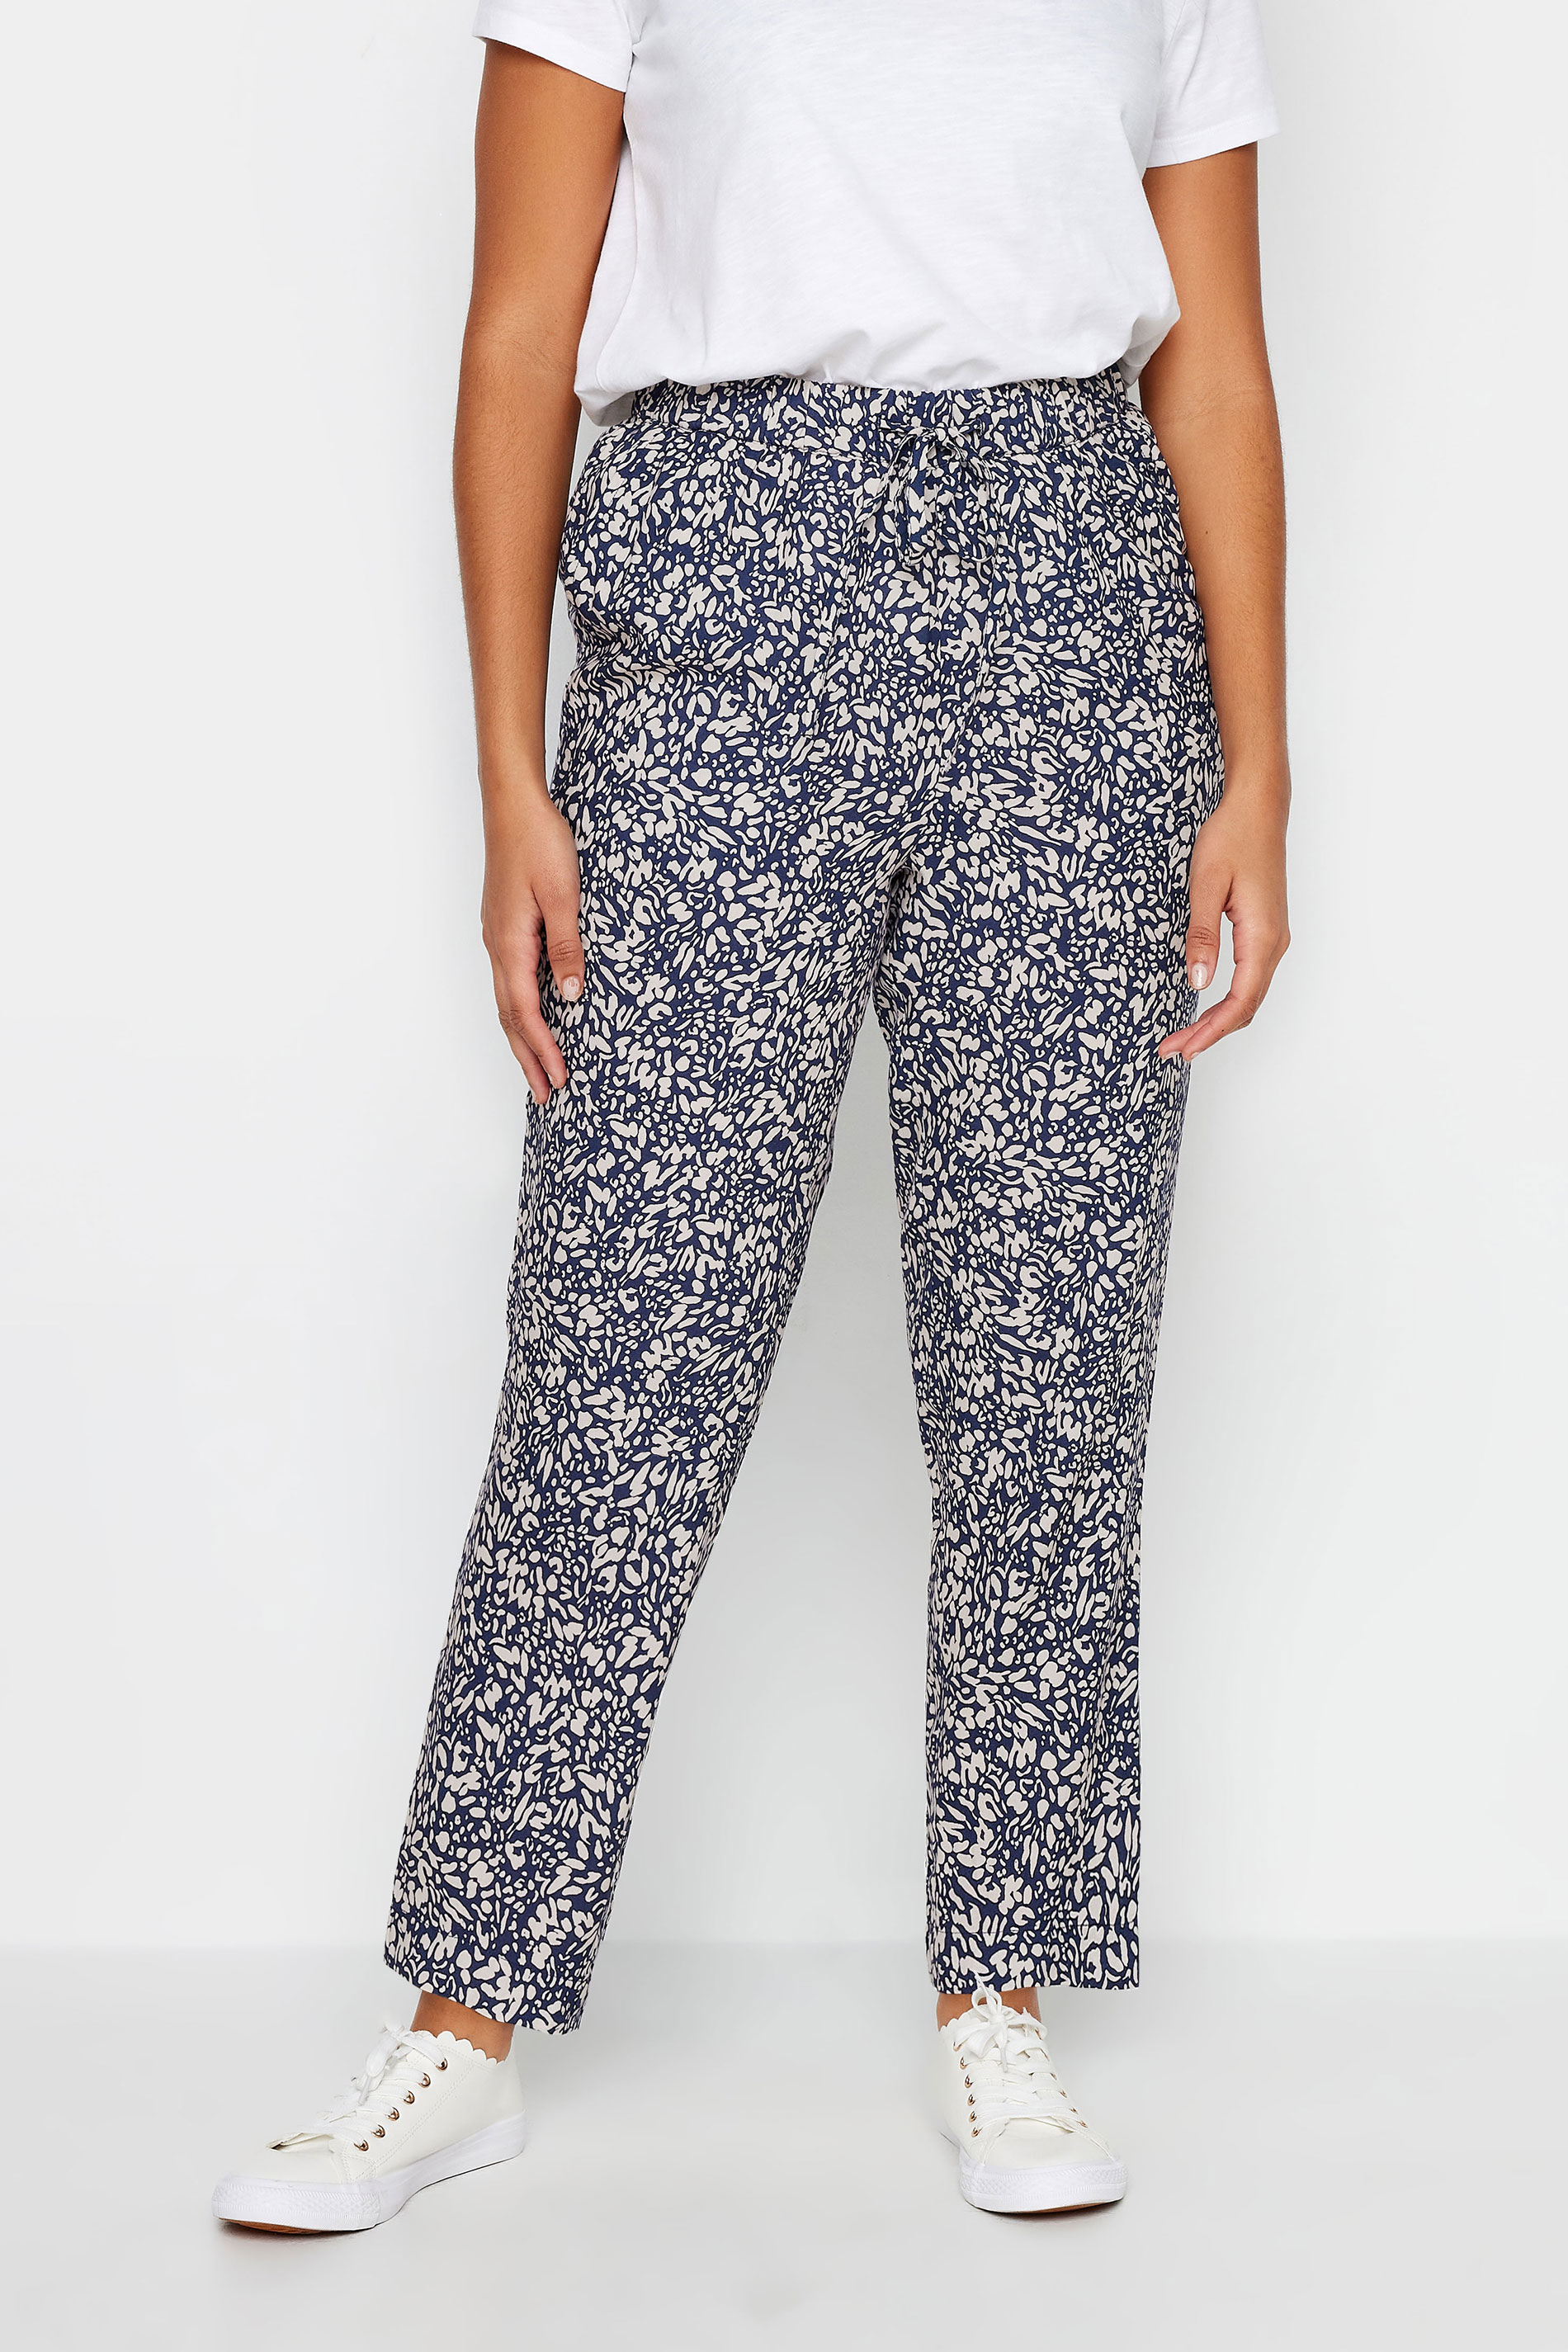 M&Co Navy Blue & Ivory Markings Print Trousers | M&Co 1